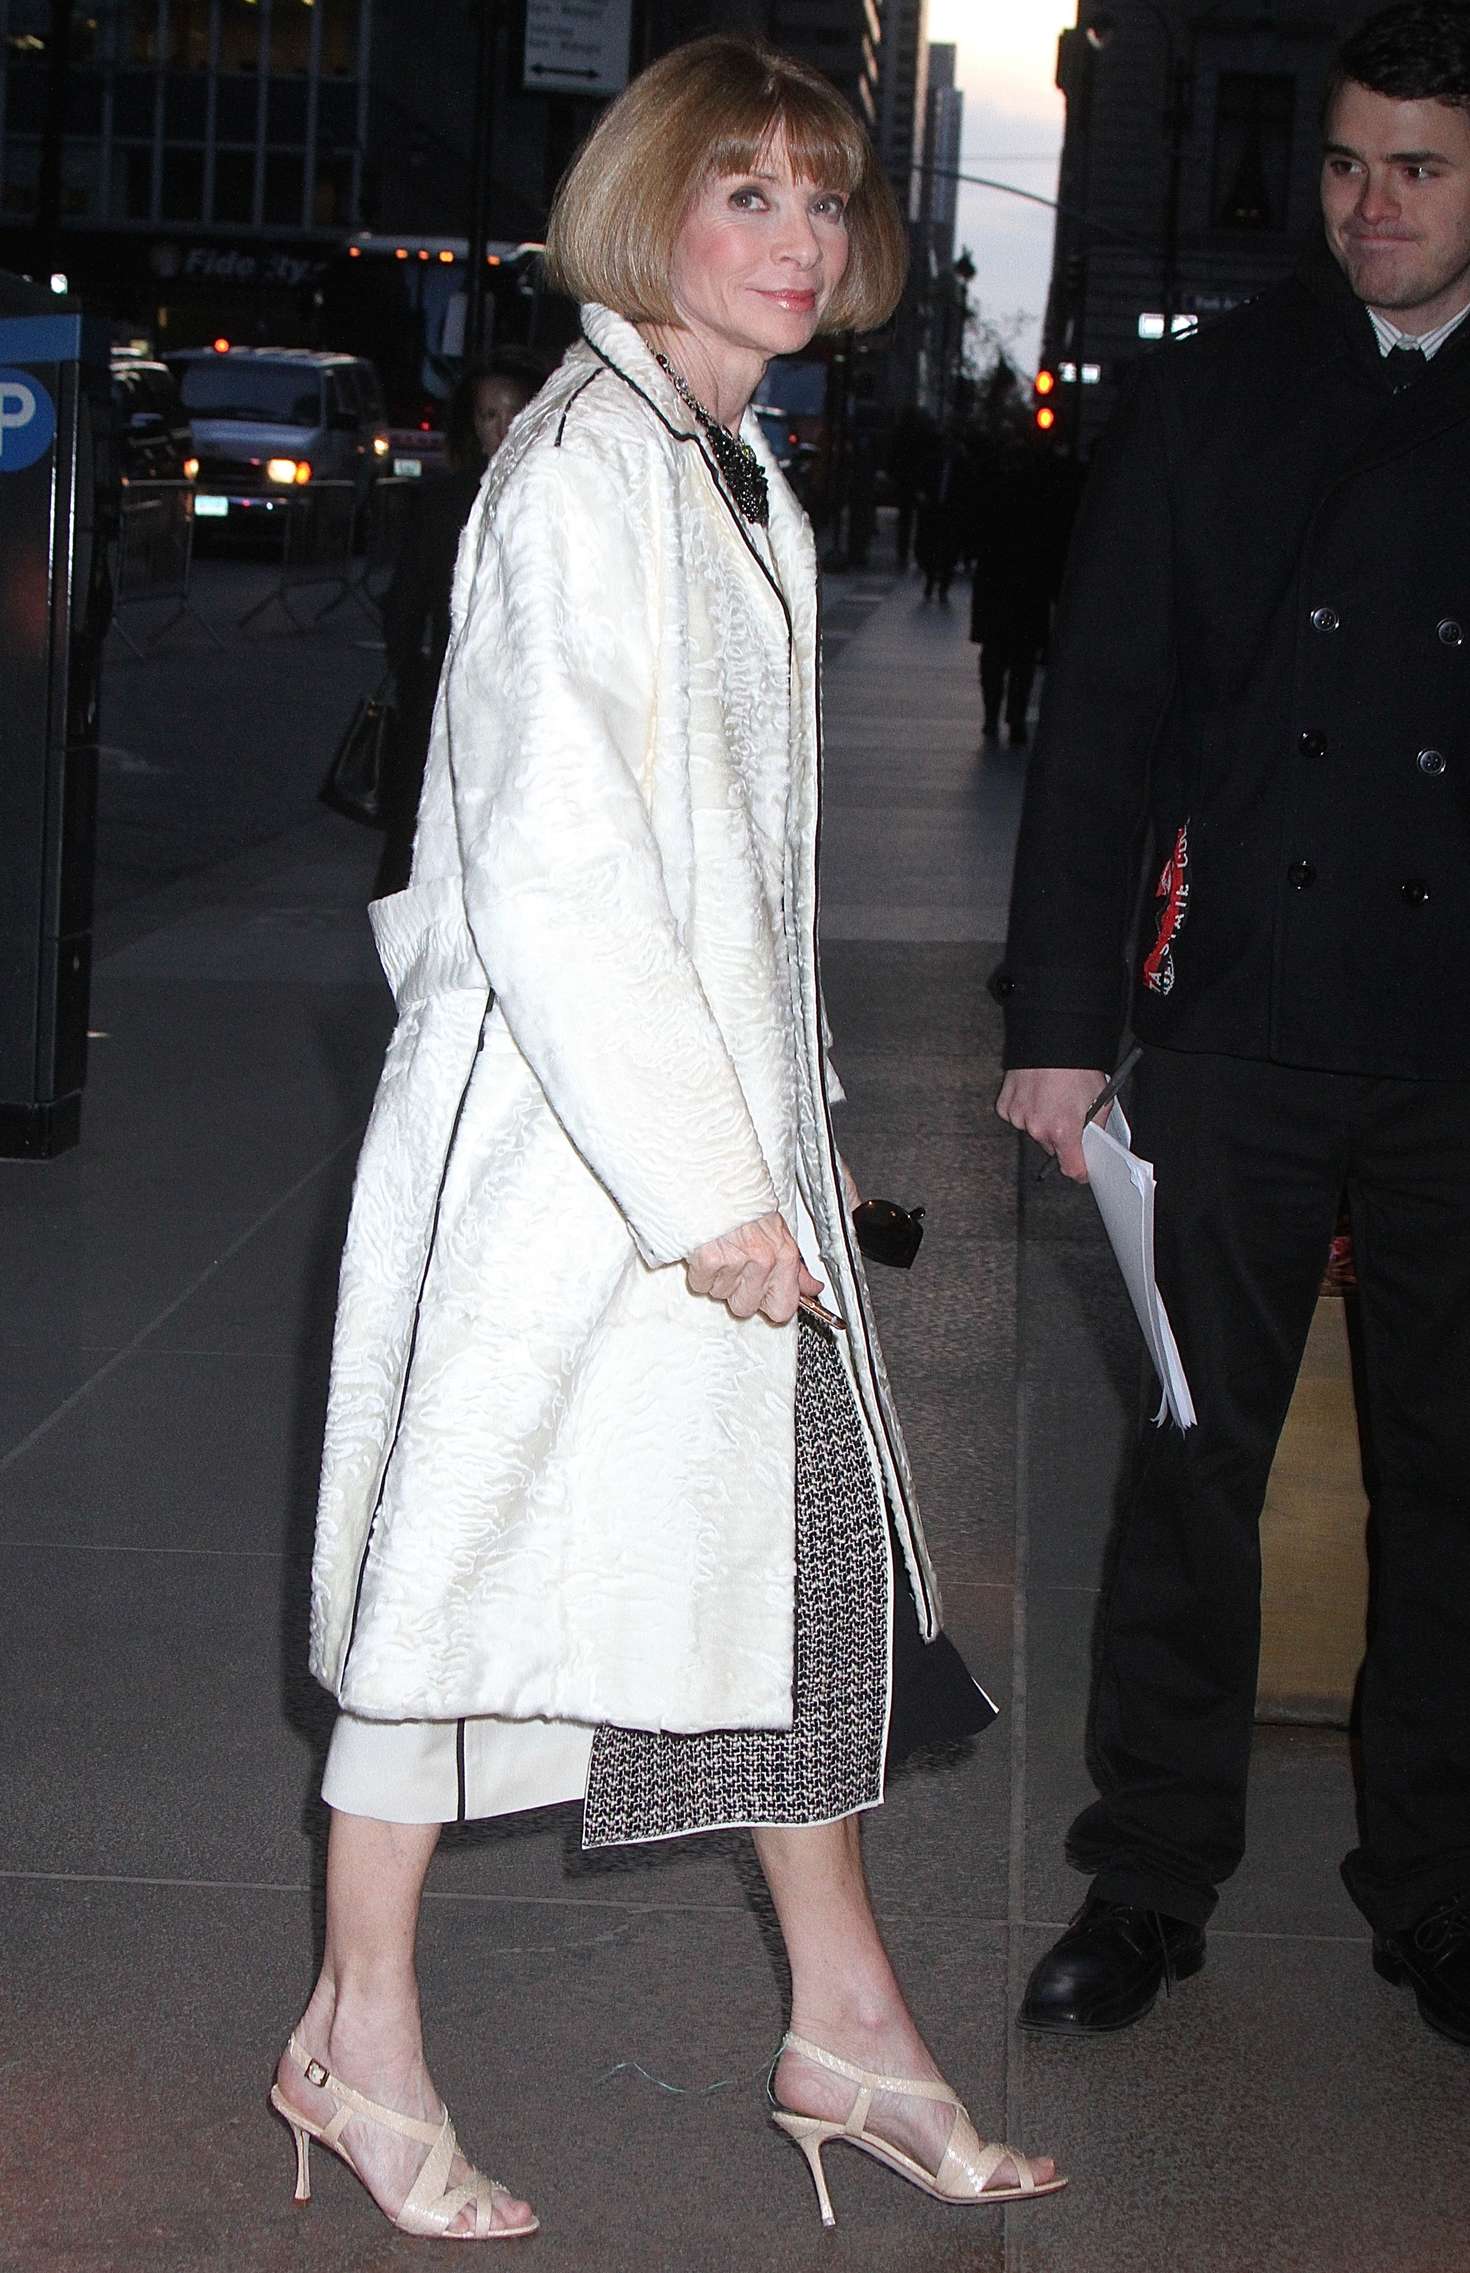 Anna Wintour Hollywood Reporters Most Powerful People in Media Event in New York-1